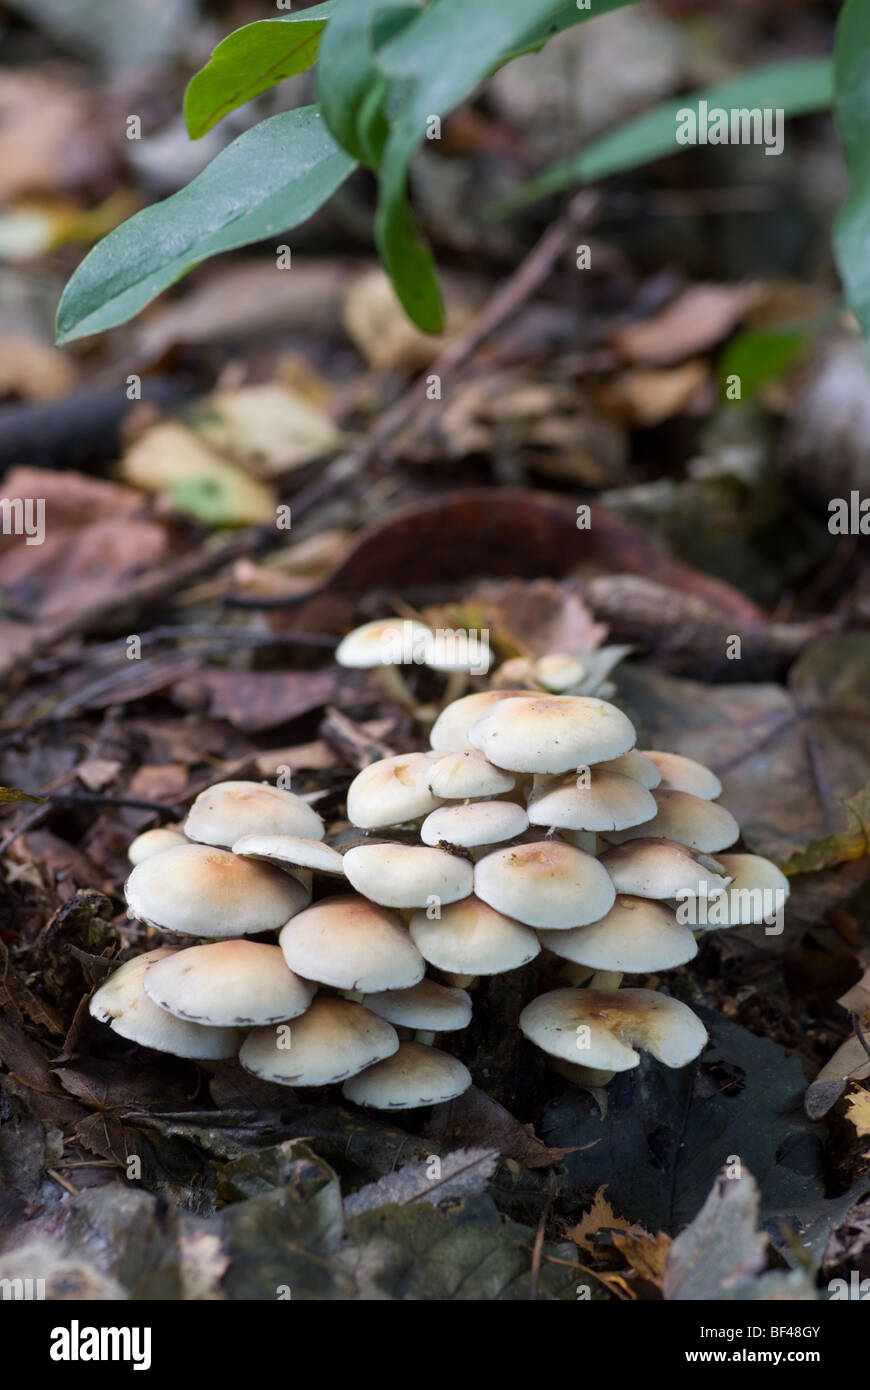 Clusters of young honey fungus caps (armillaria mellea) on an old decaying tree stump Stock Photo